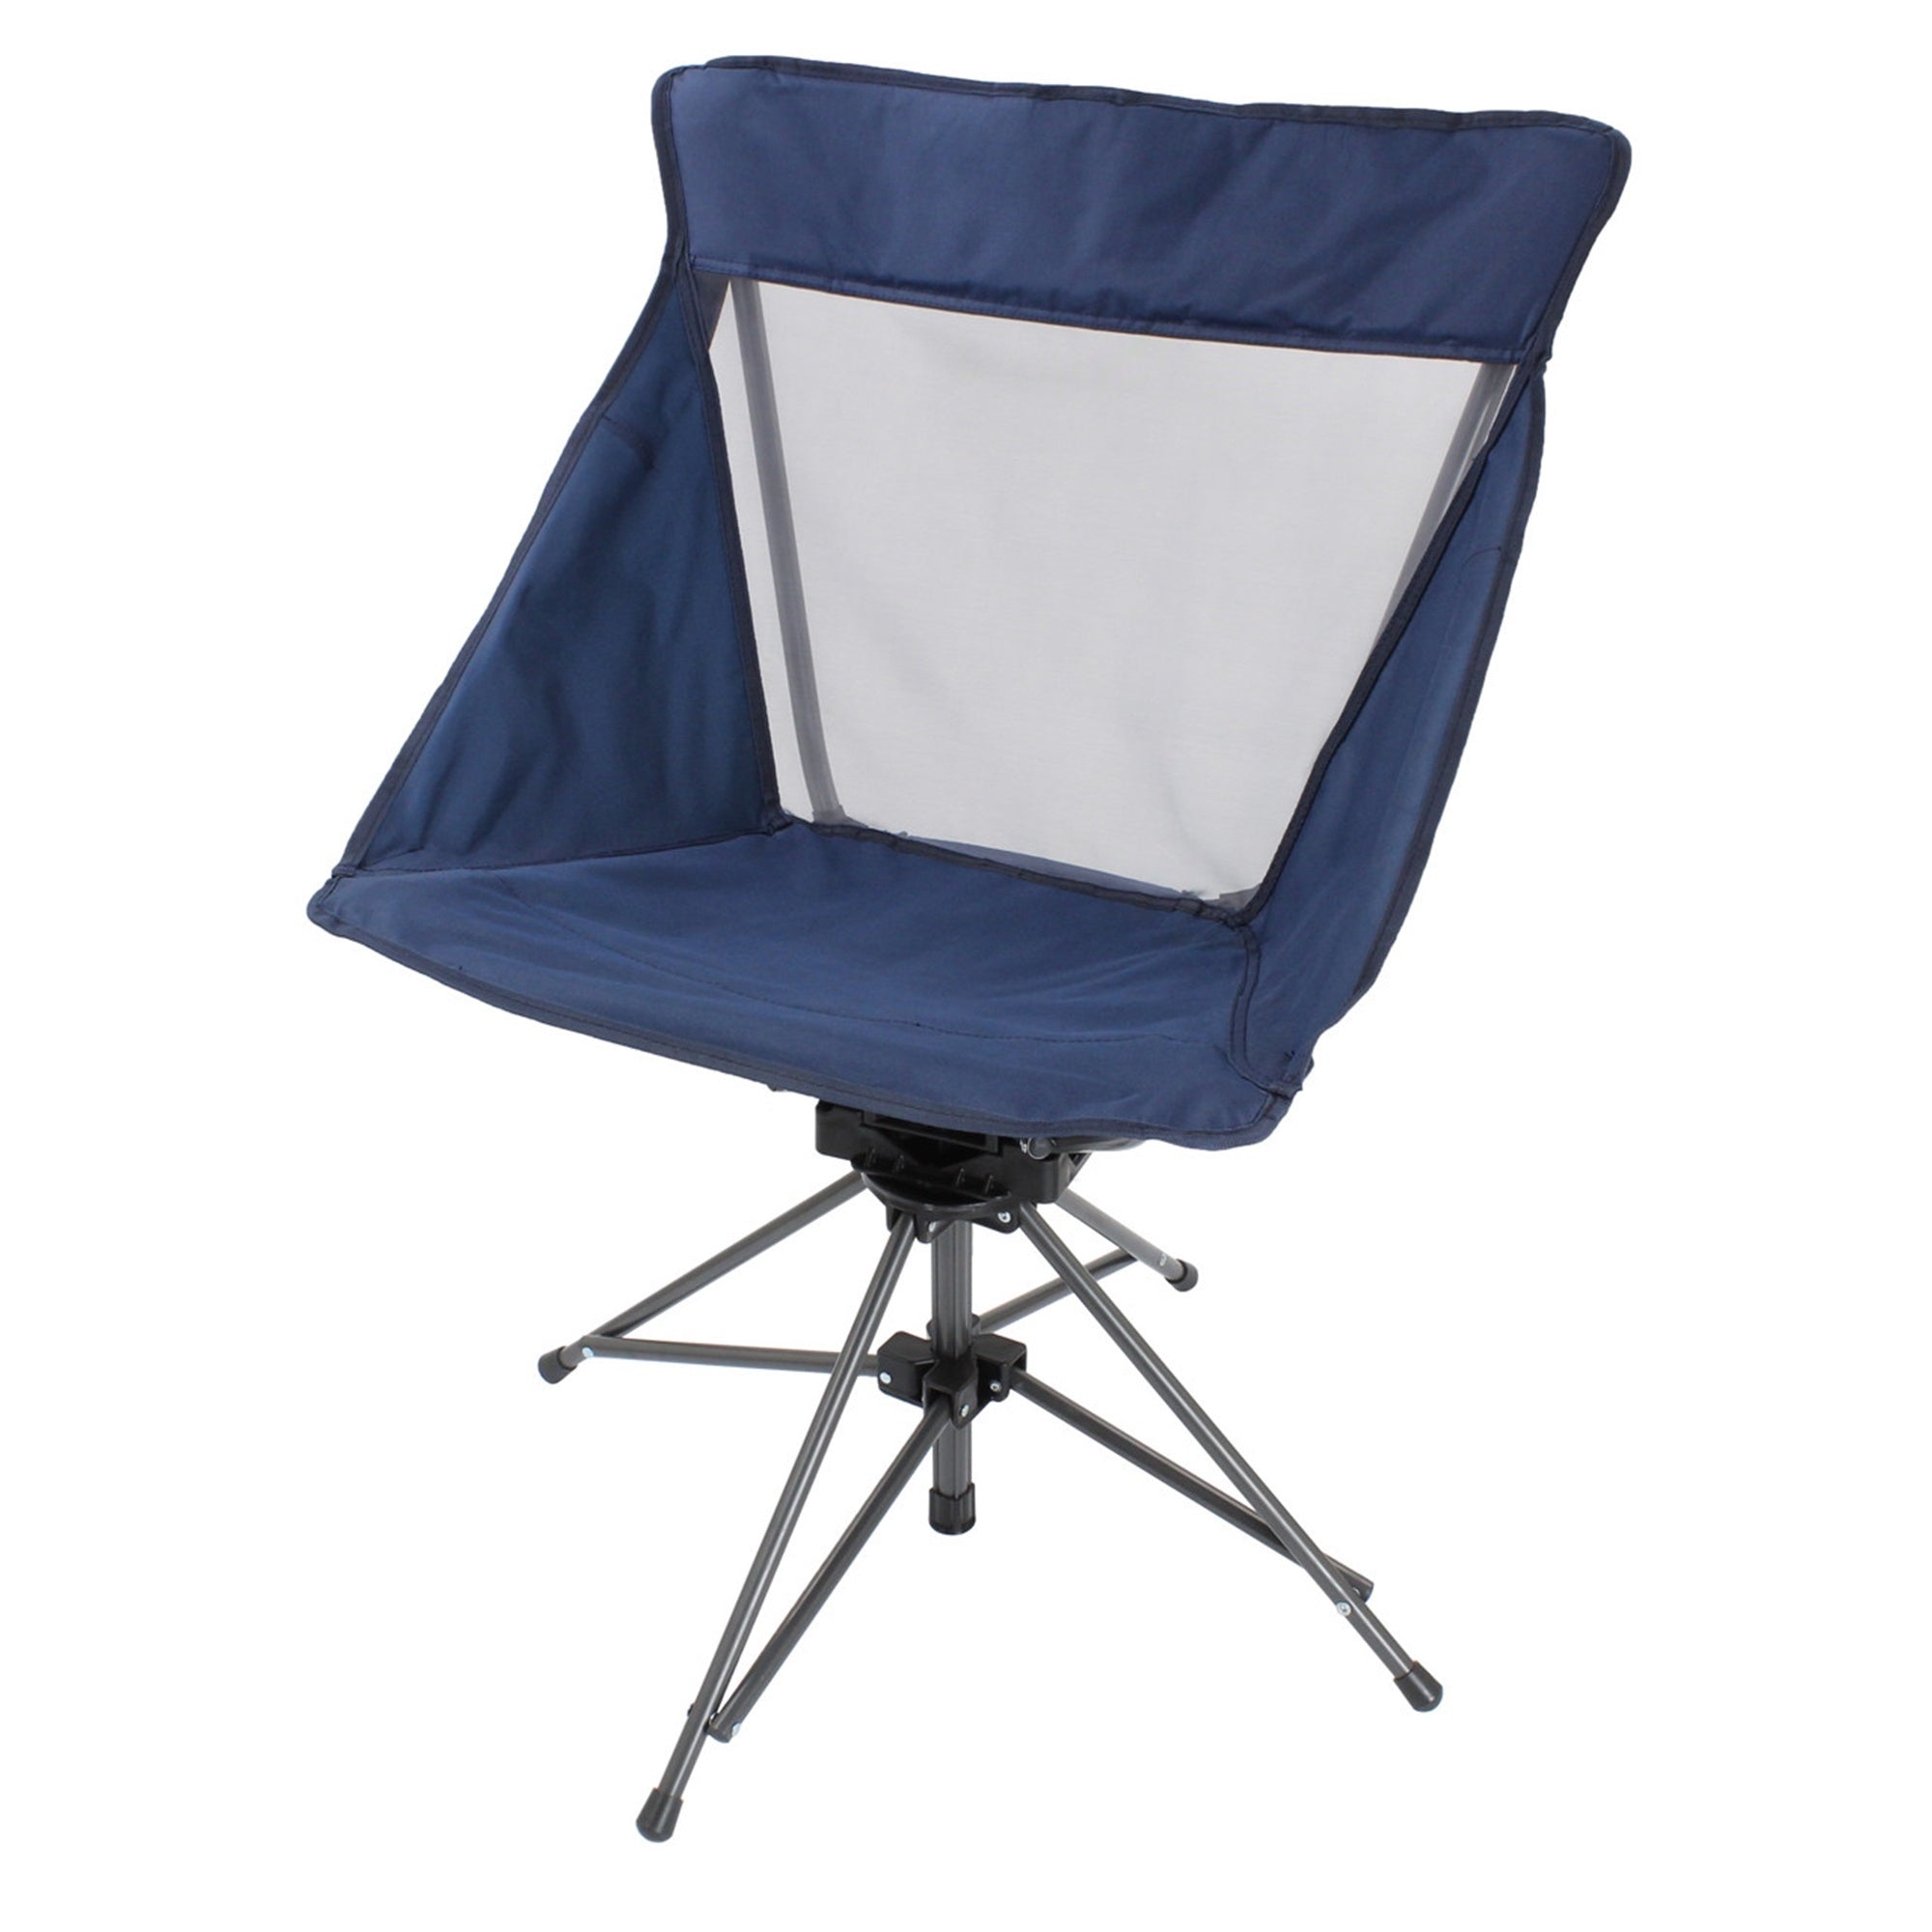 Zenithen Limited Swivel Folding Chair, Navy Color With Mesh Back Cool Seating